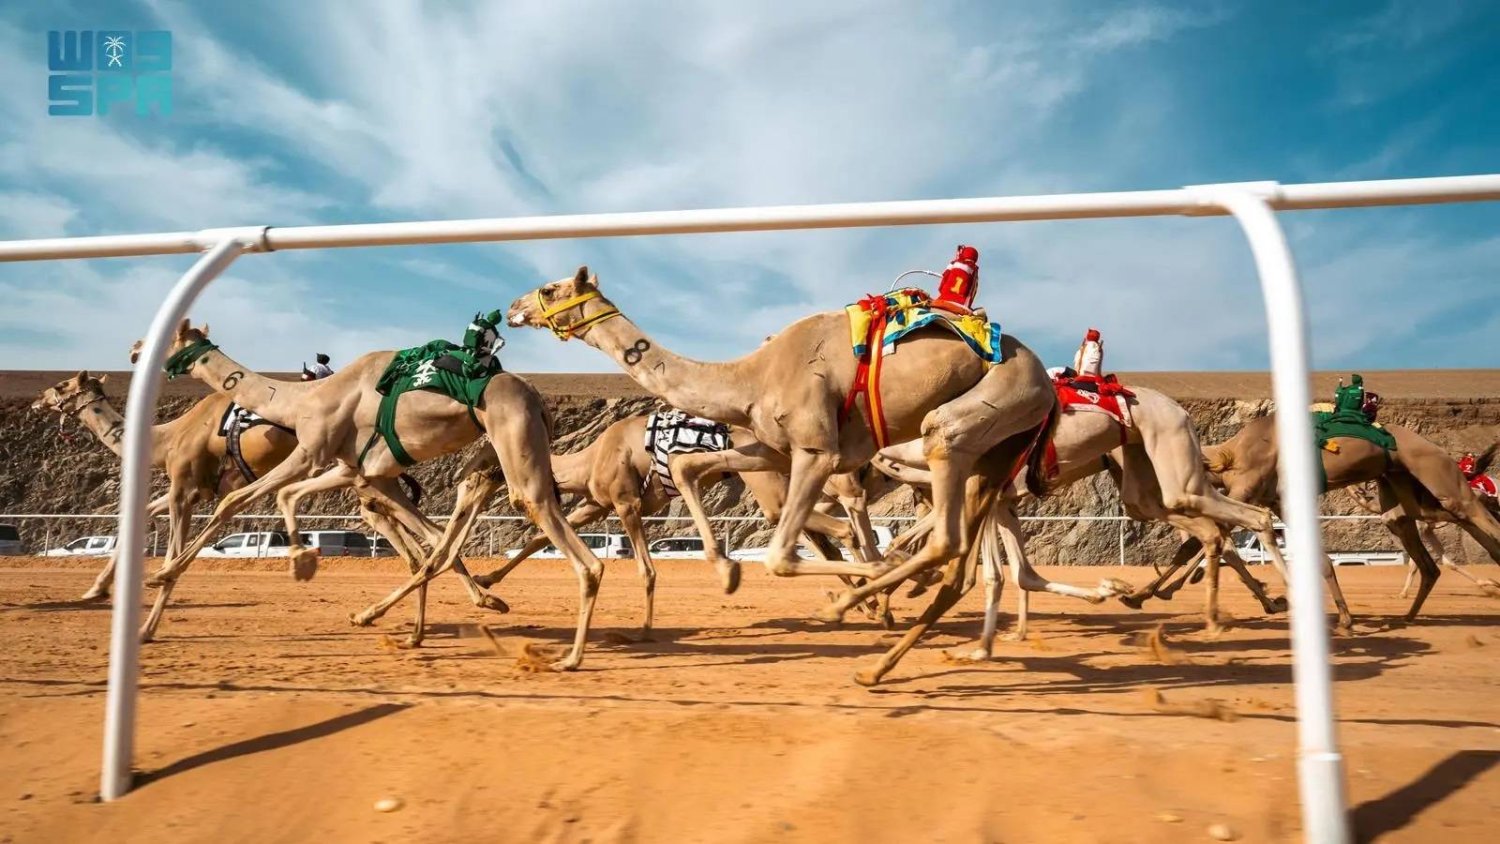 The event is part of their broader initiative to establish AlUla as the premier destination for traditional sports in the region. (SPA)